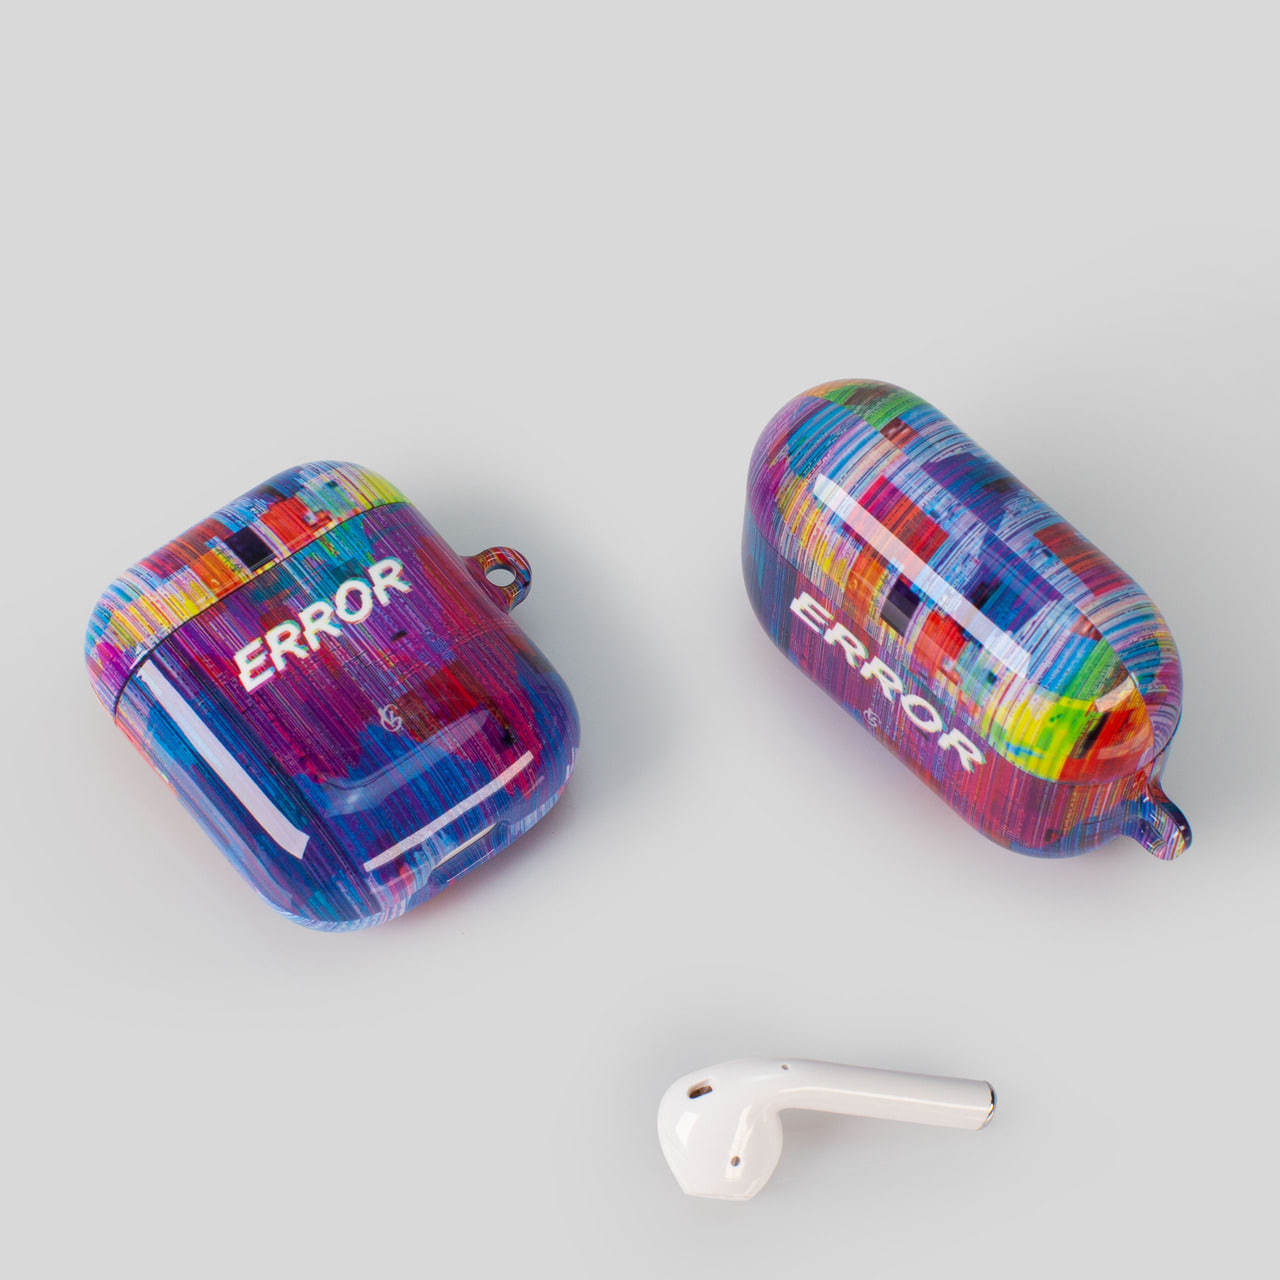 [Airpods cases] Noise No.13